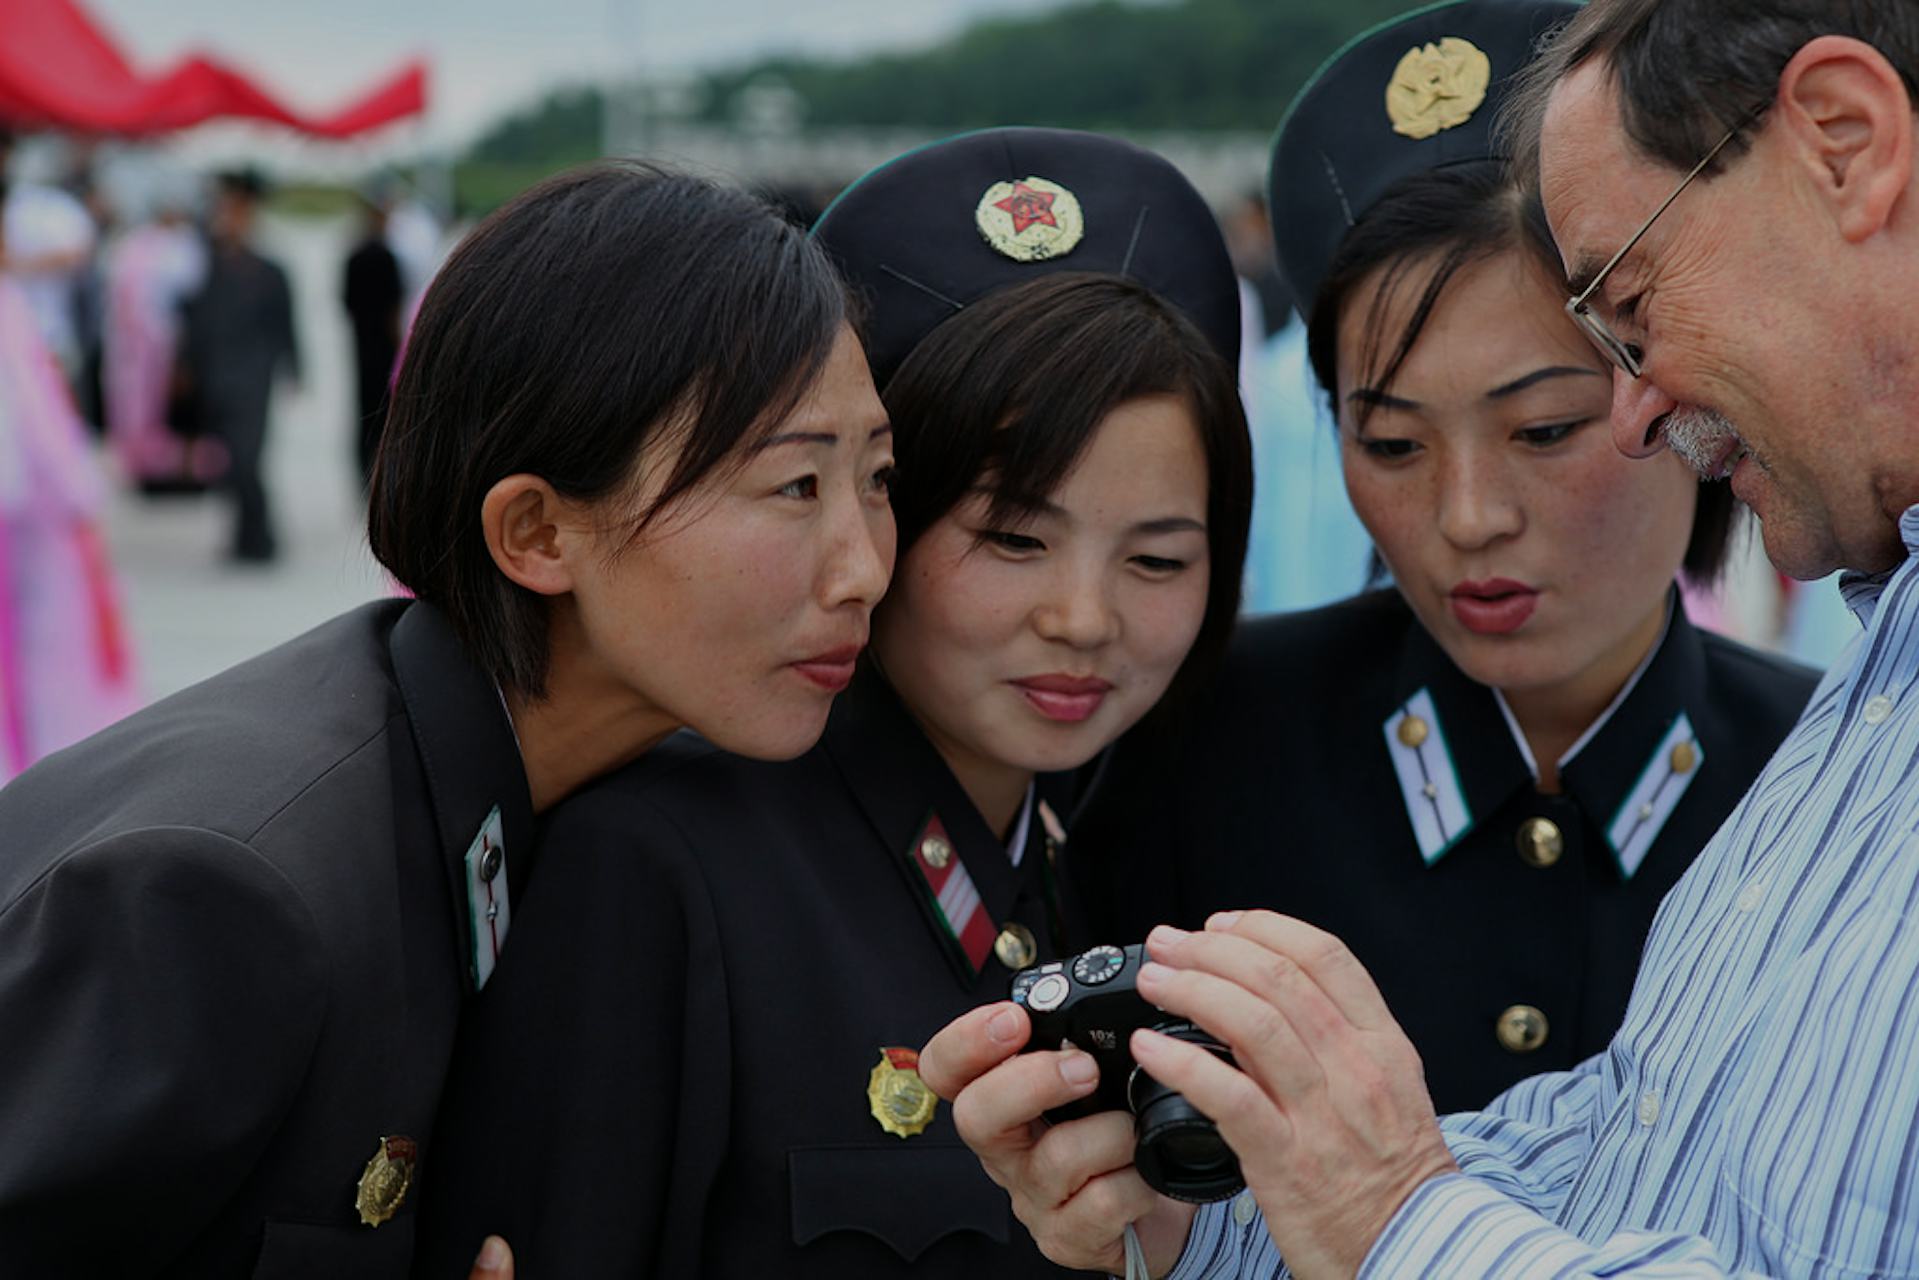 Pornhub Just Released New Data On What North Koreans Watch To Get Off